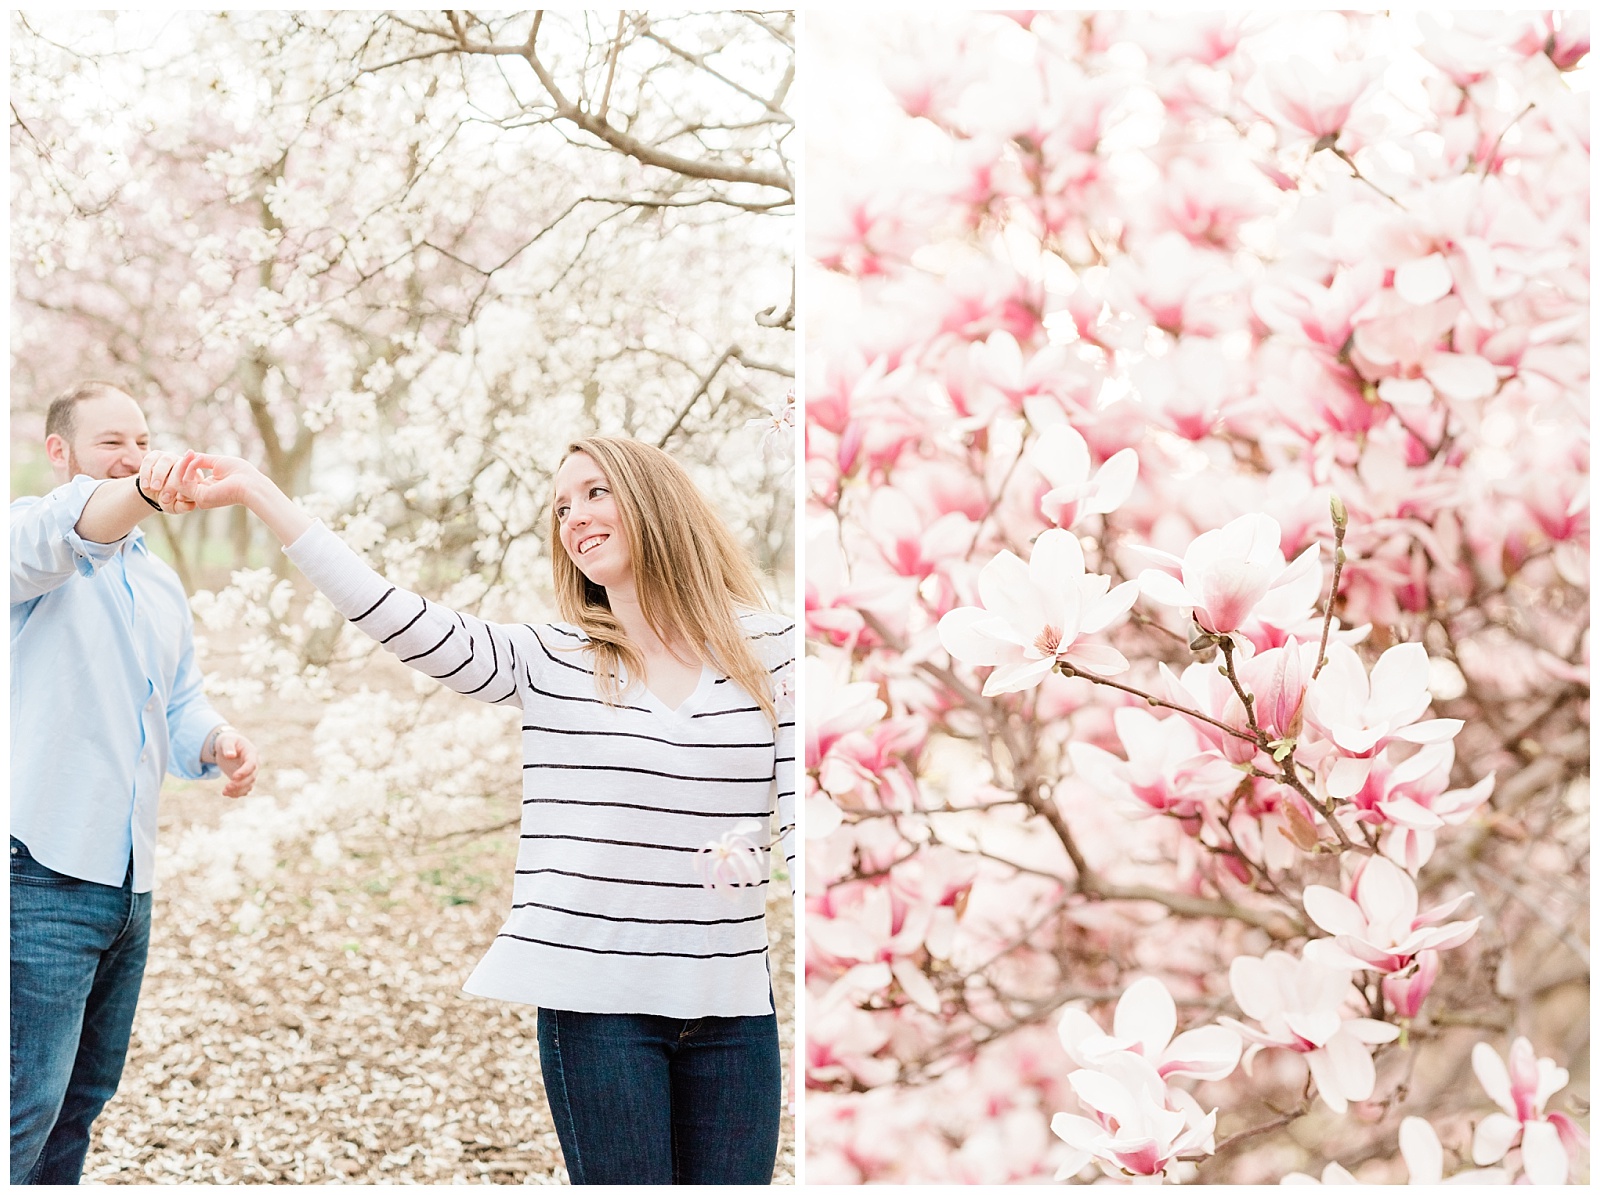 Central Park, NYC engagement session, springtime, wedding photographer, New York, flowers, blooming, bloom, light and airy